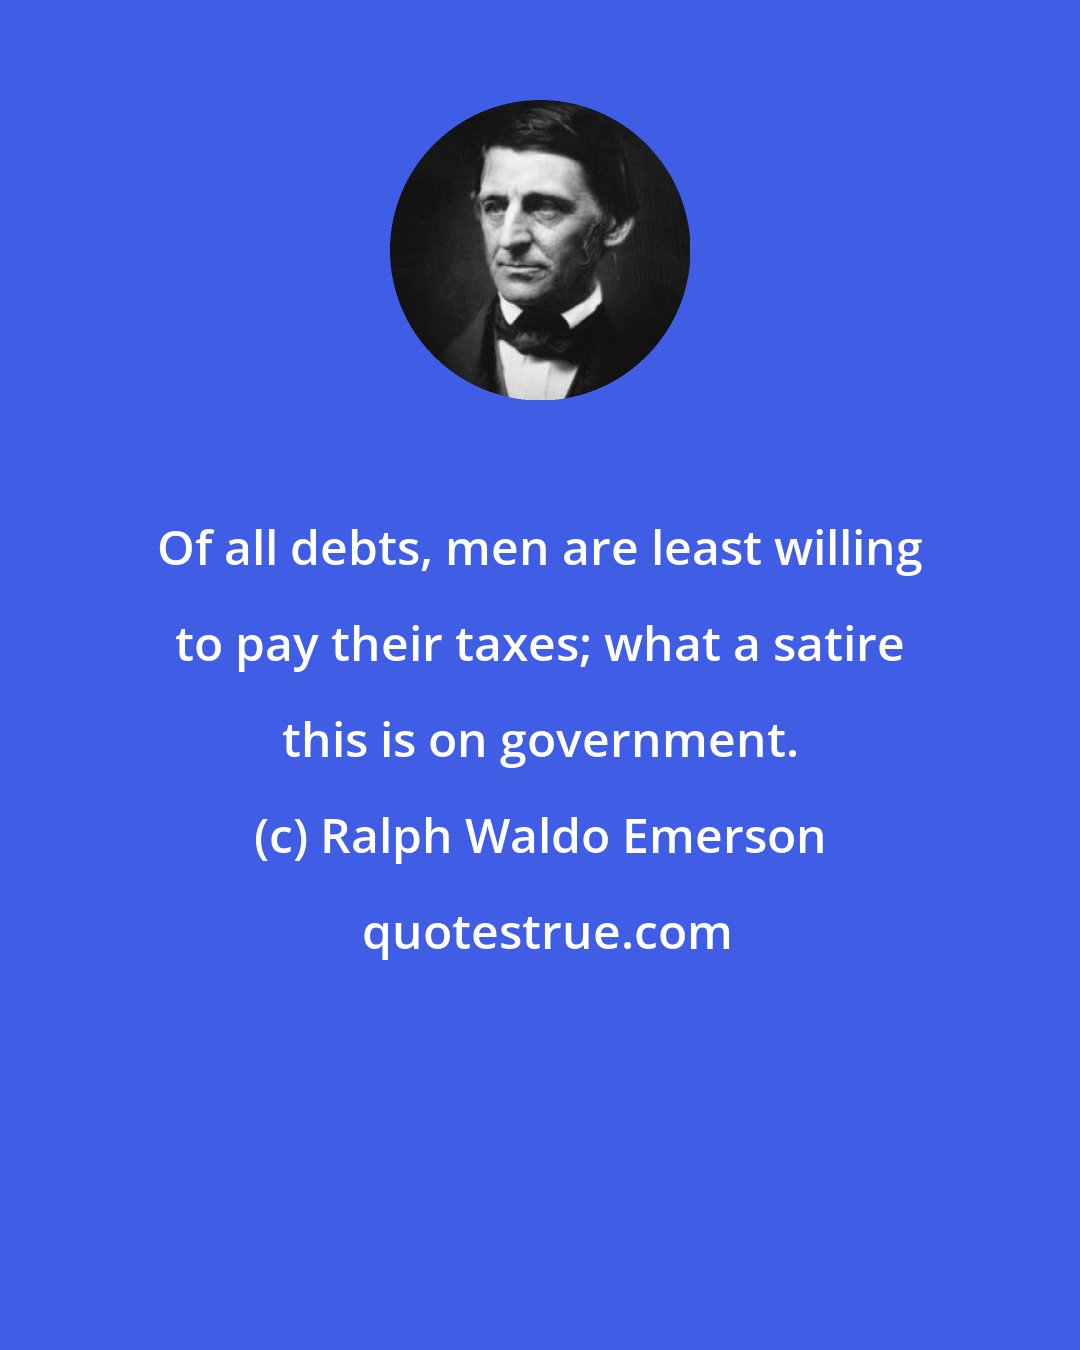 Ralph Waldo Emerson: Of all debts, men are least willing to pay their taxes; what a satire this is on government.